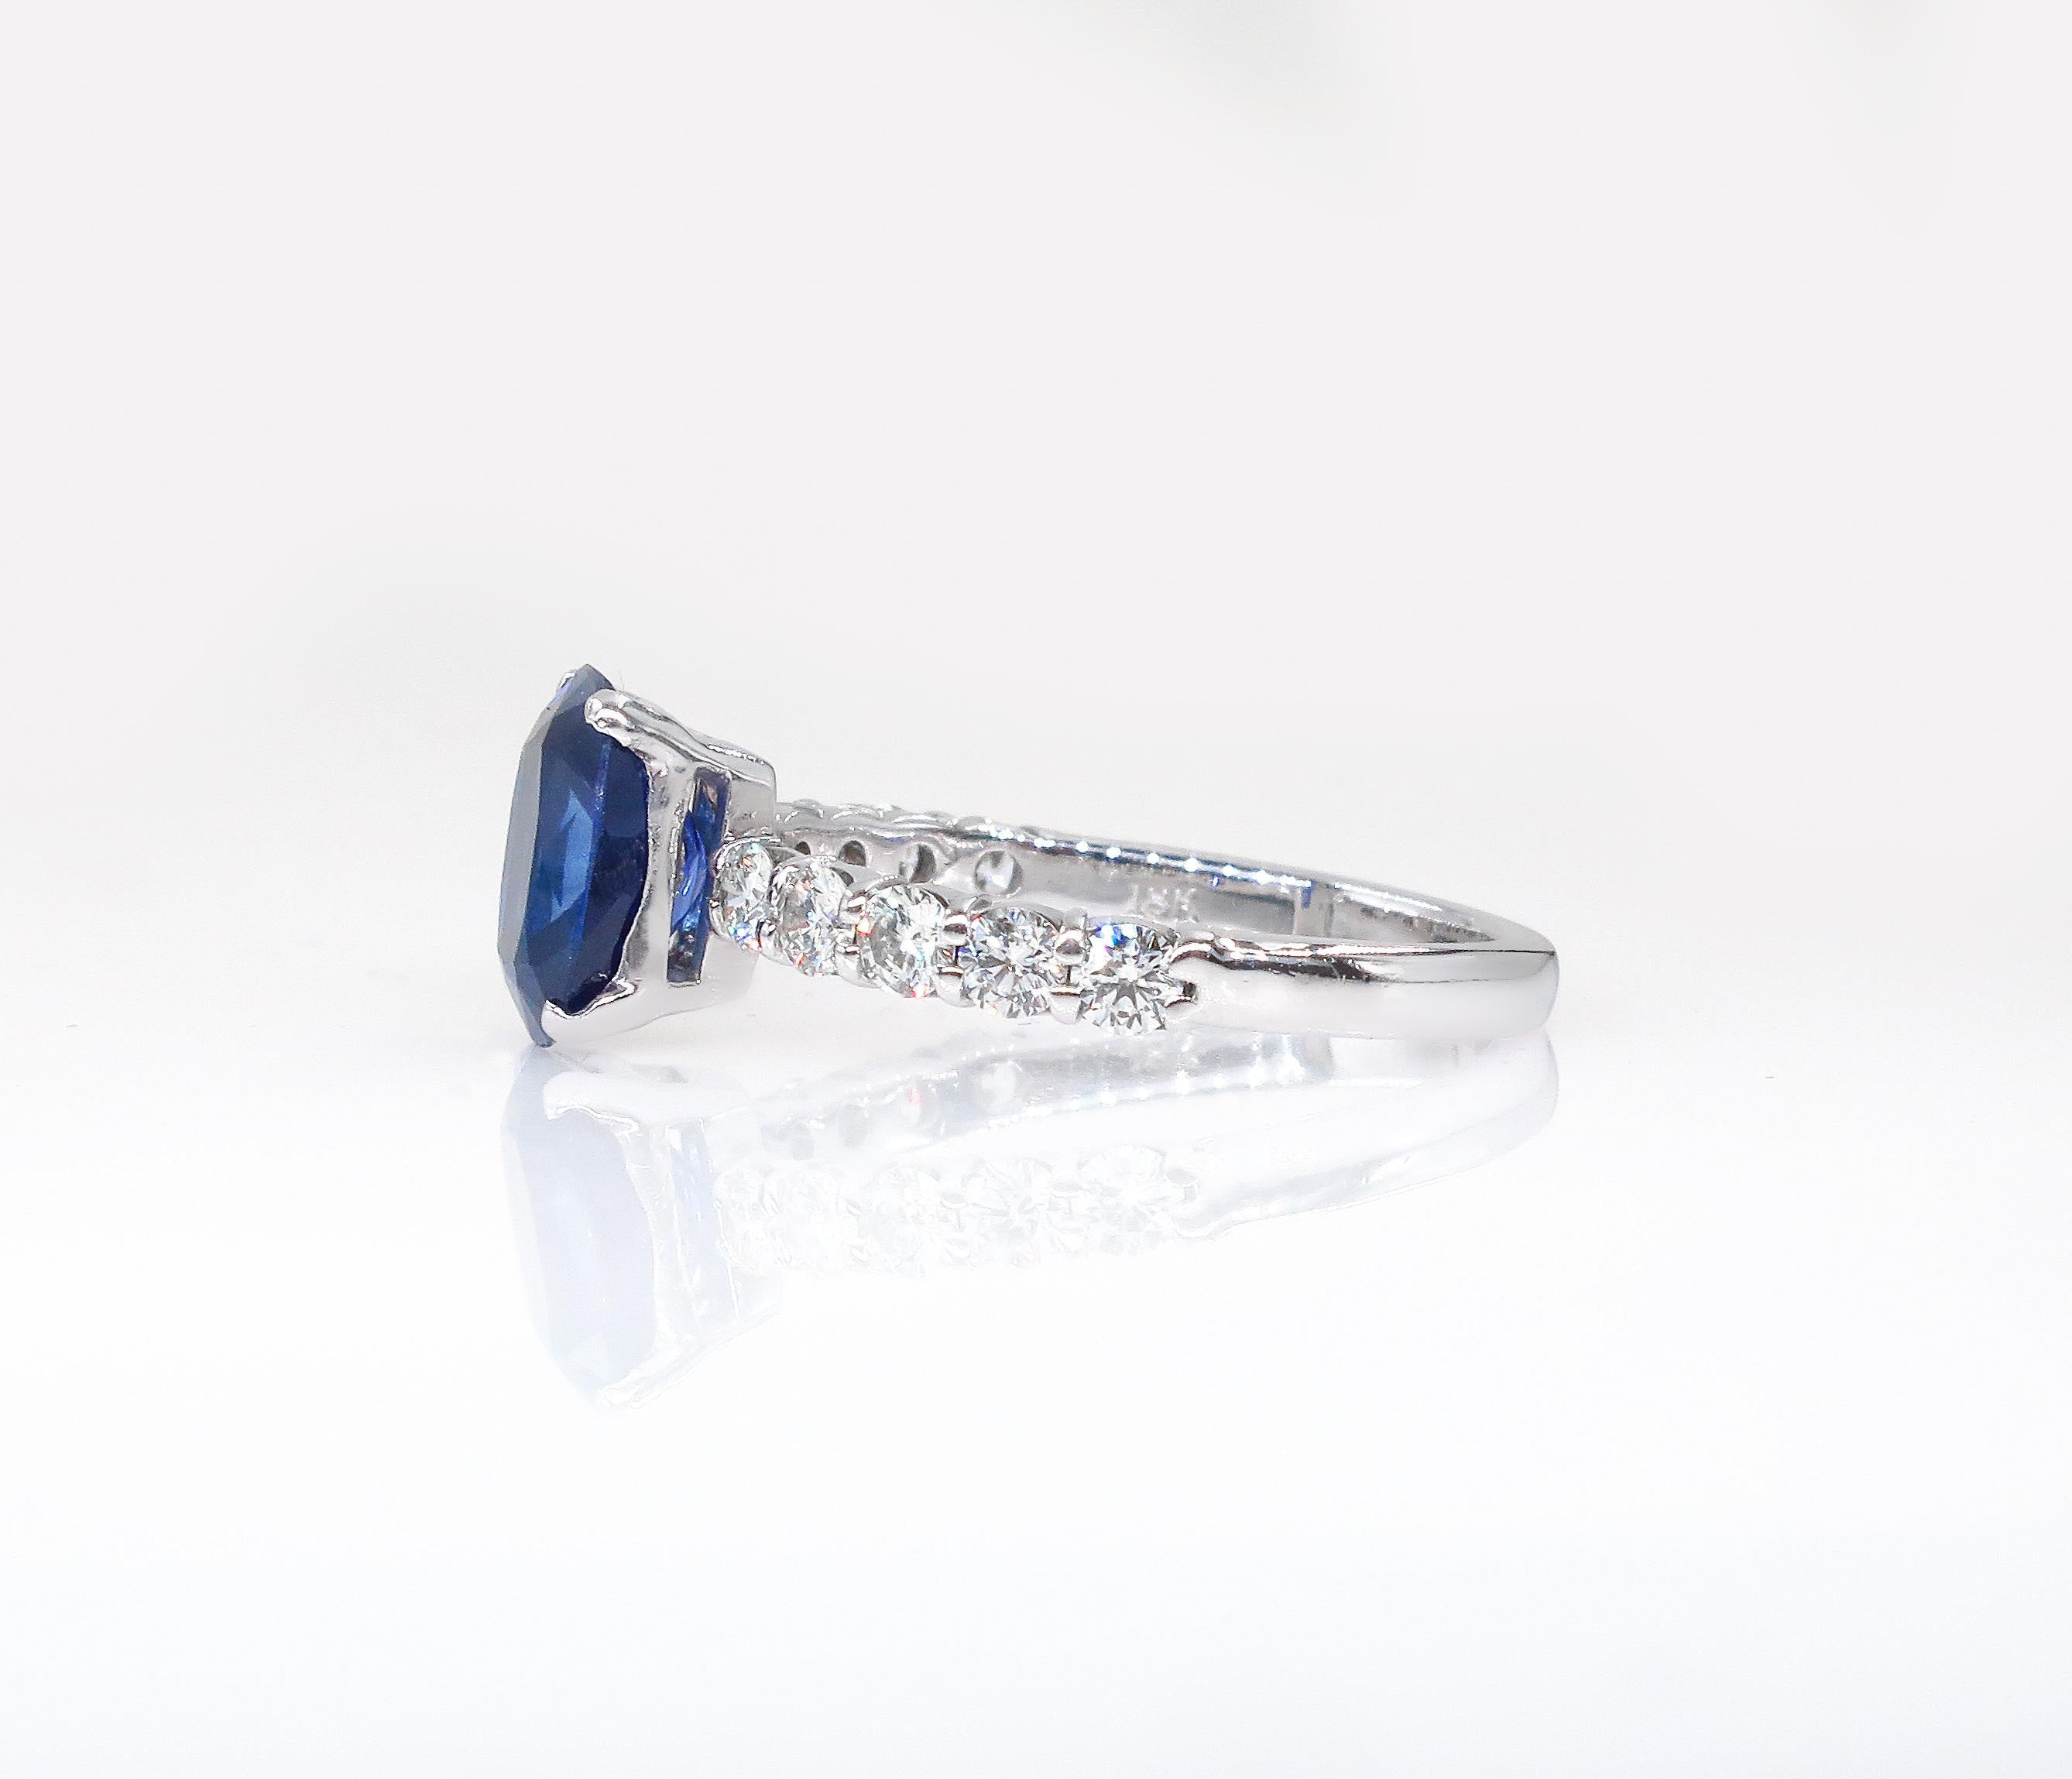 Vintage Estate GIA 2.82ct Synthetic Sapphire Diamonds Engagement Wedding Plat In Good Condition For Sale In New York, NY